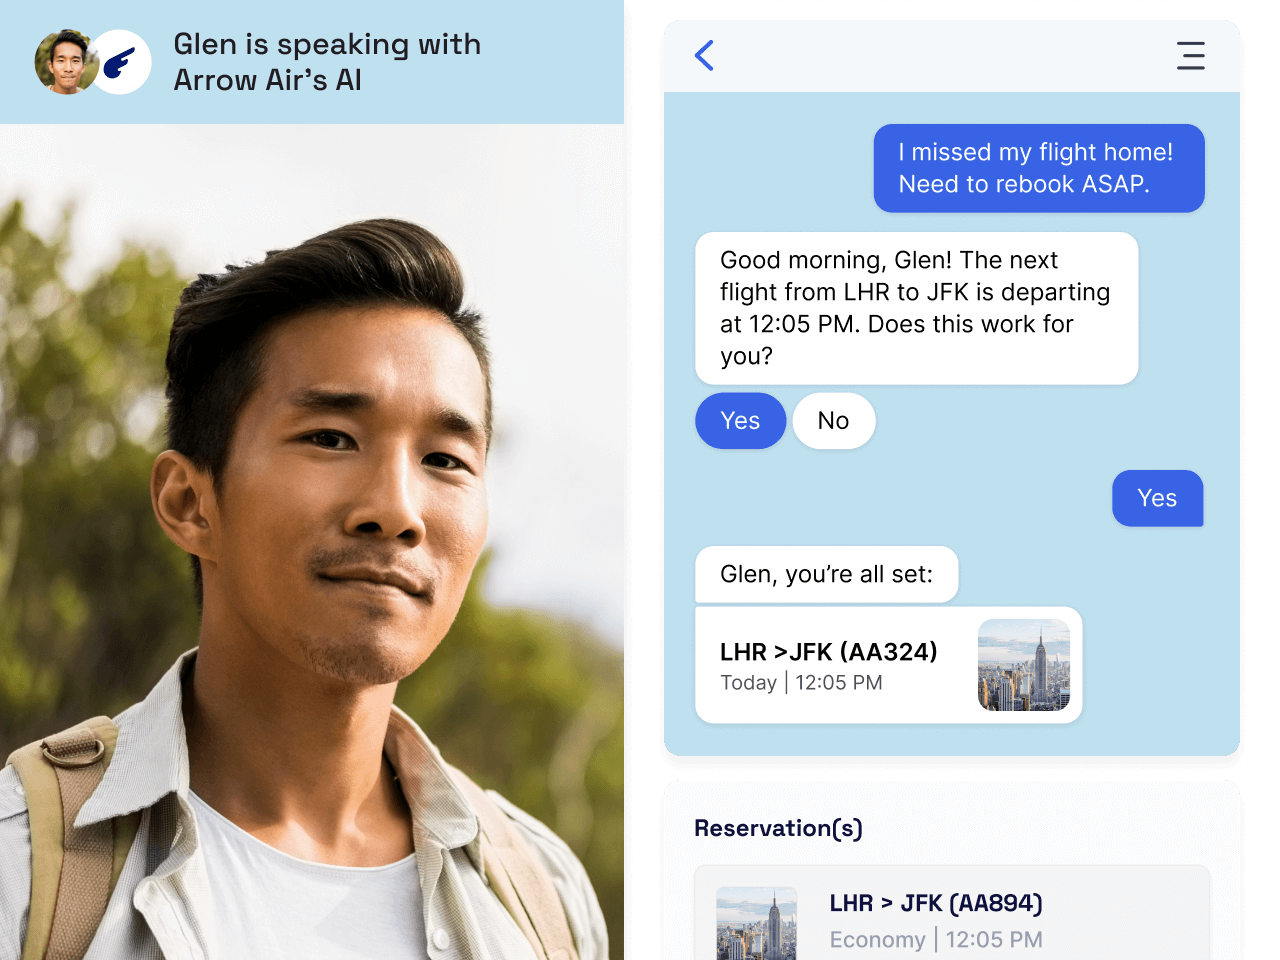 Conversational AI platform using natural language processing and machine learning to understand routine queries